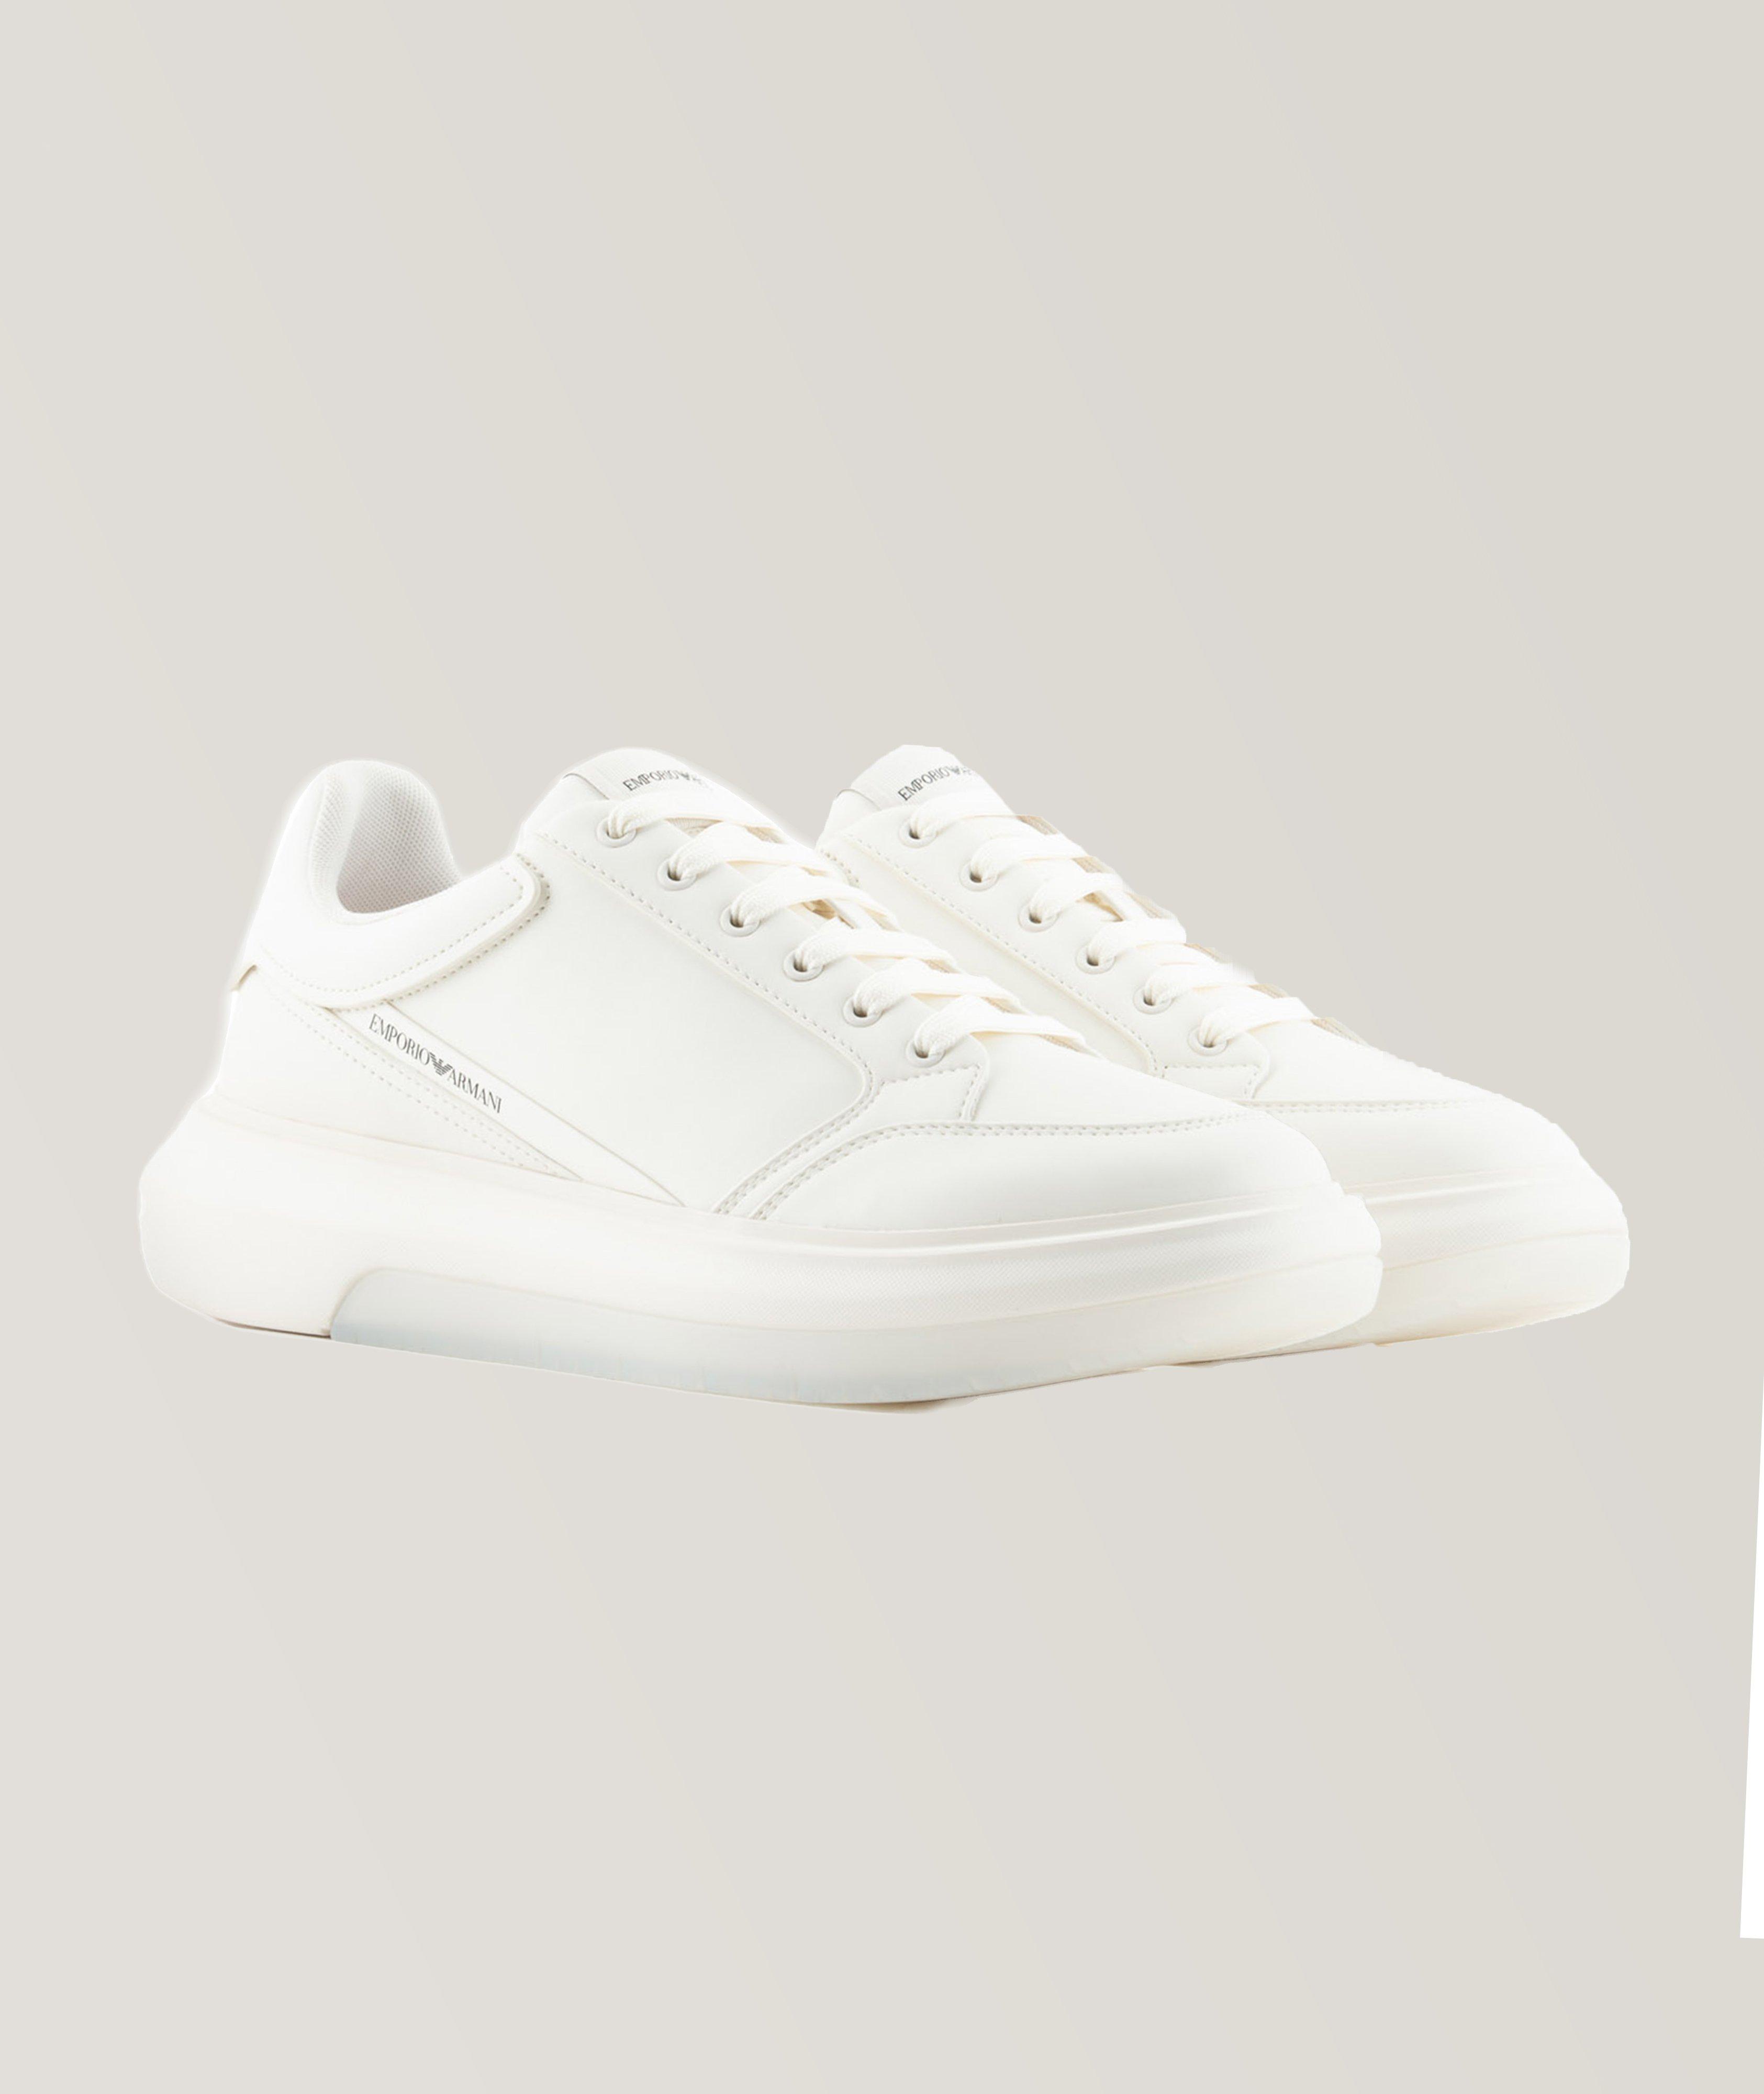 Logo Print Leather Sneakers image 1